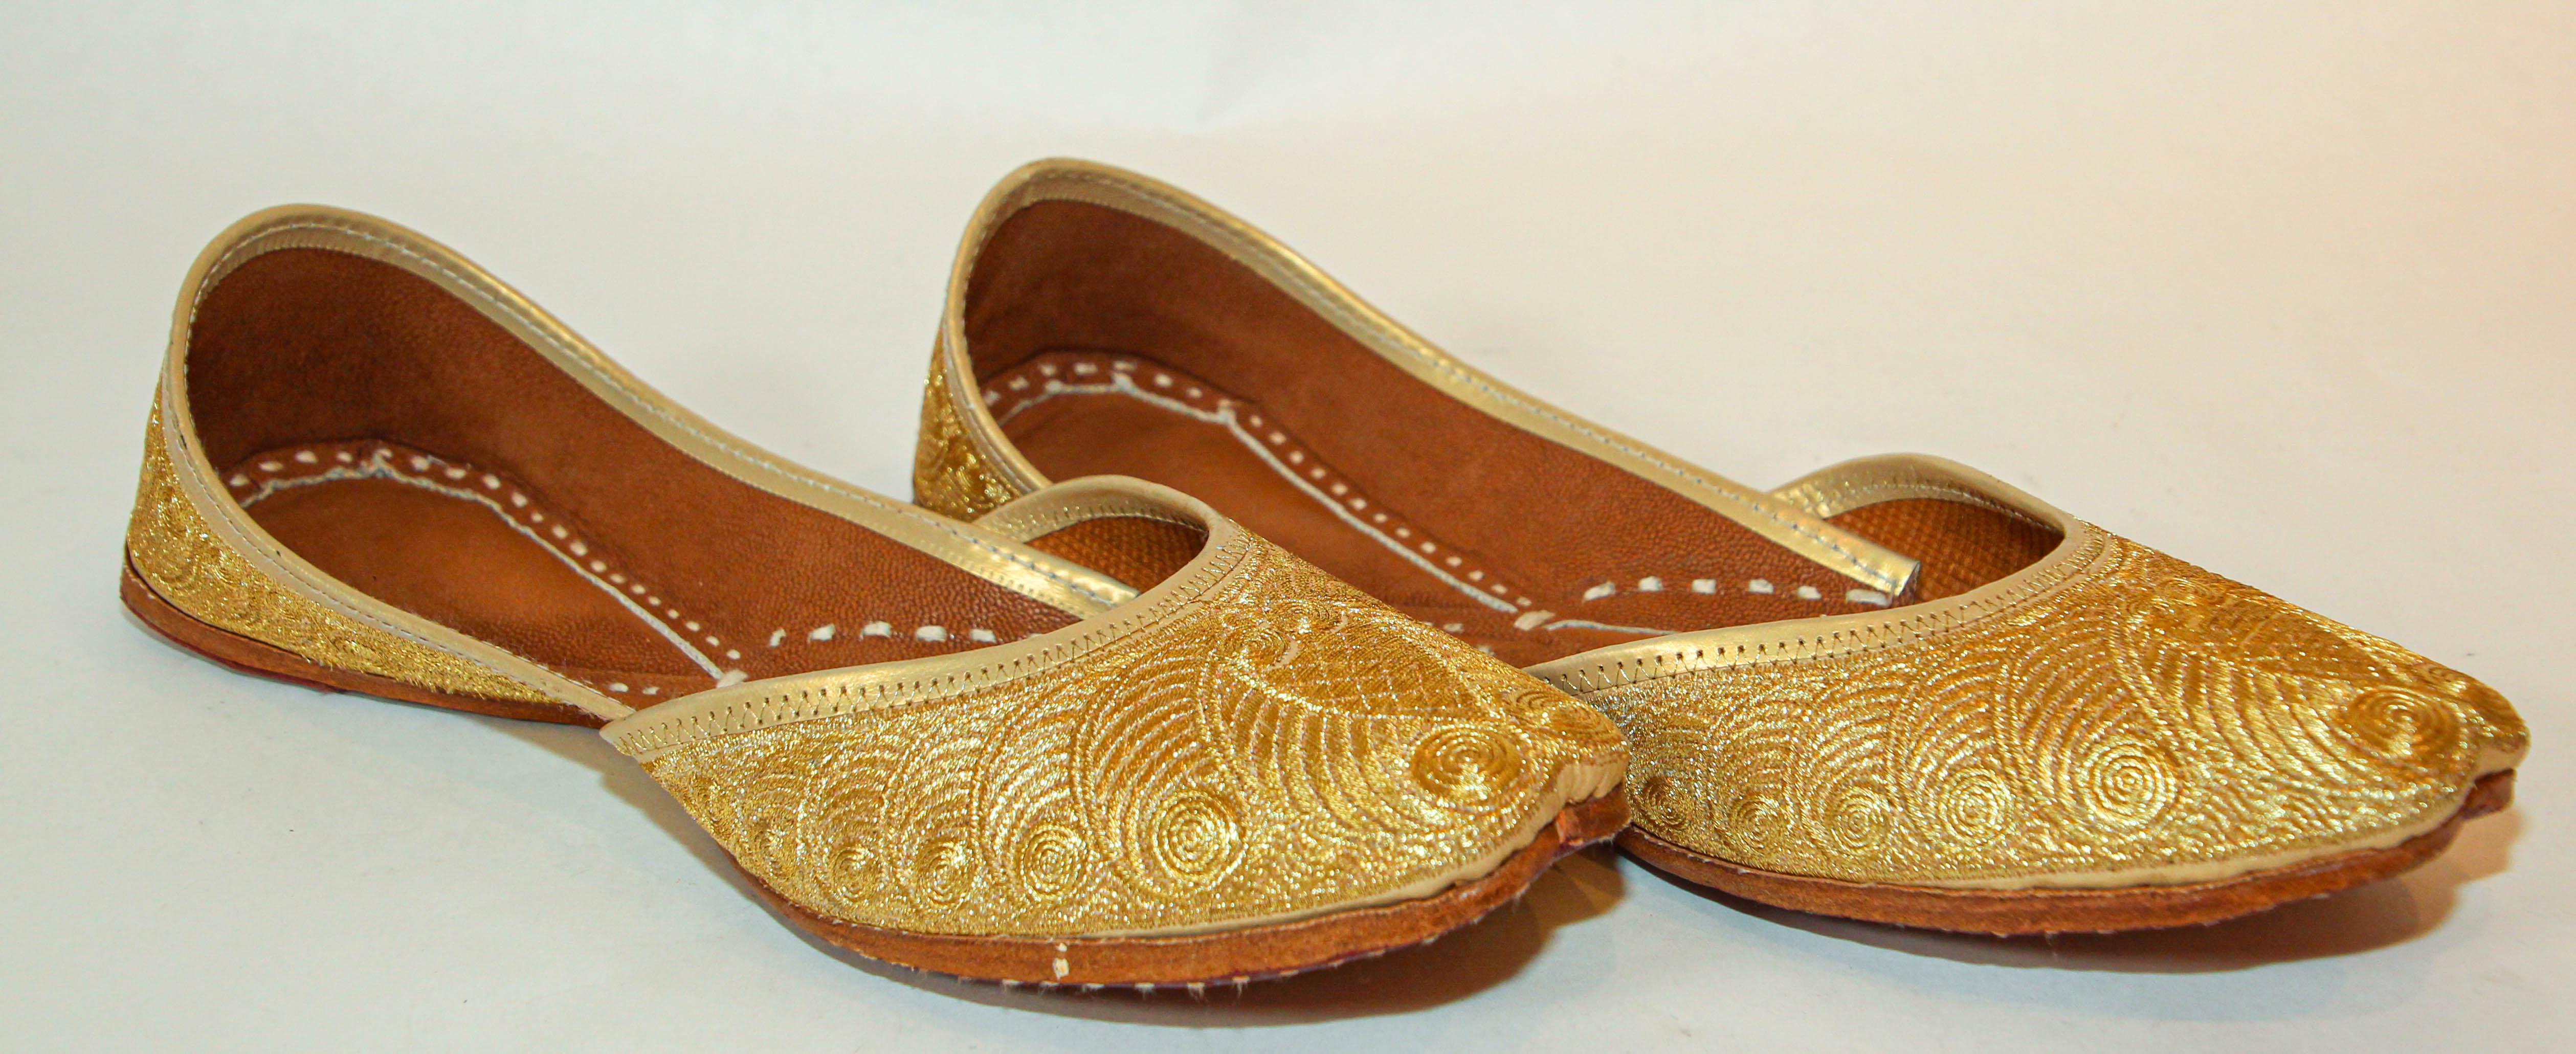 1970s Leather Indian Shoes with Gold Embroidered Size 9 In Good Condition For Sale In North Hollywood, CA